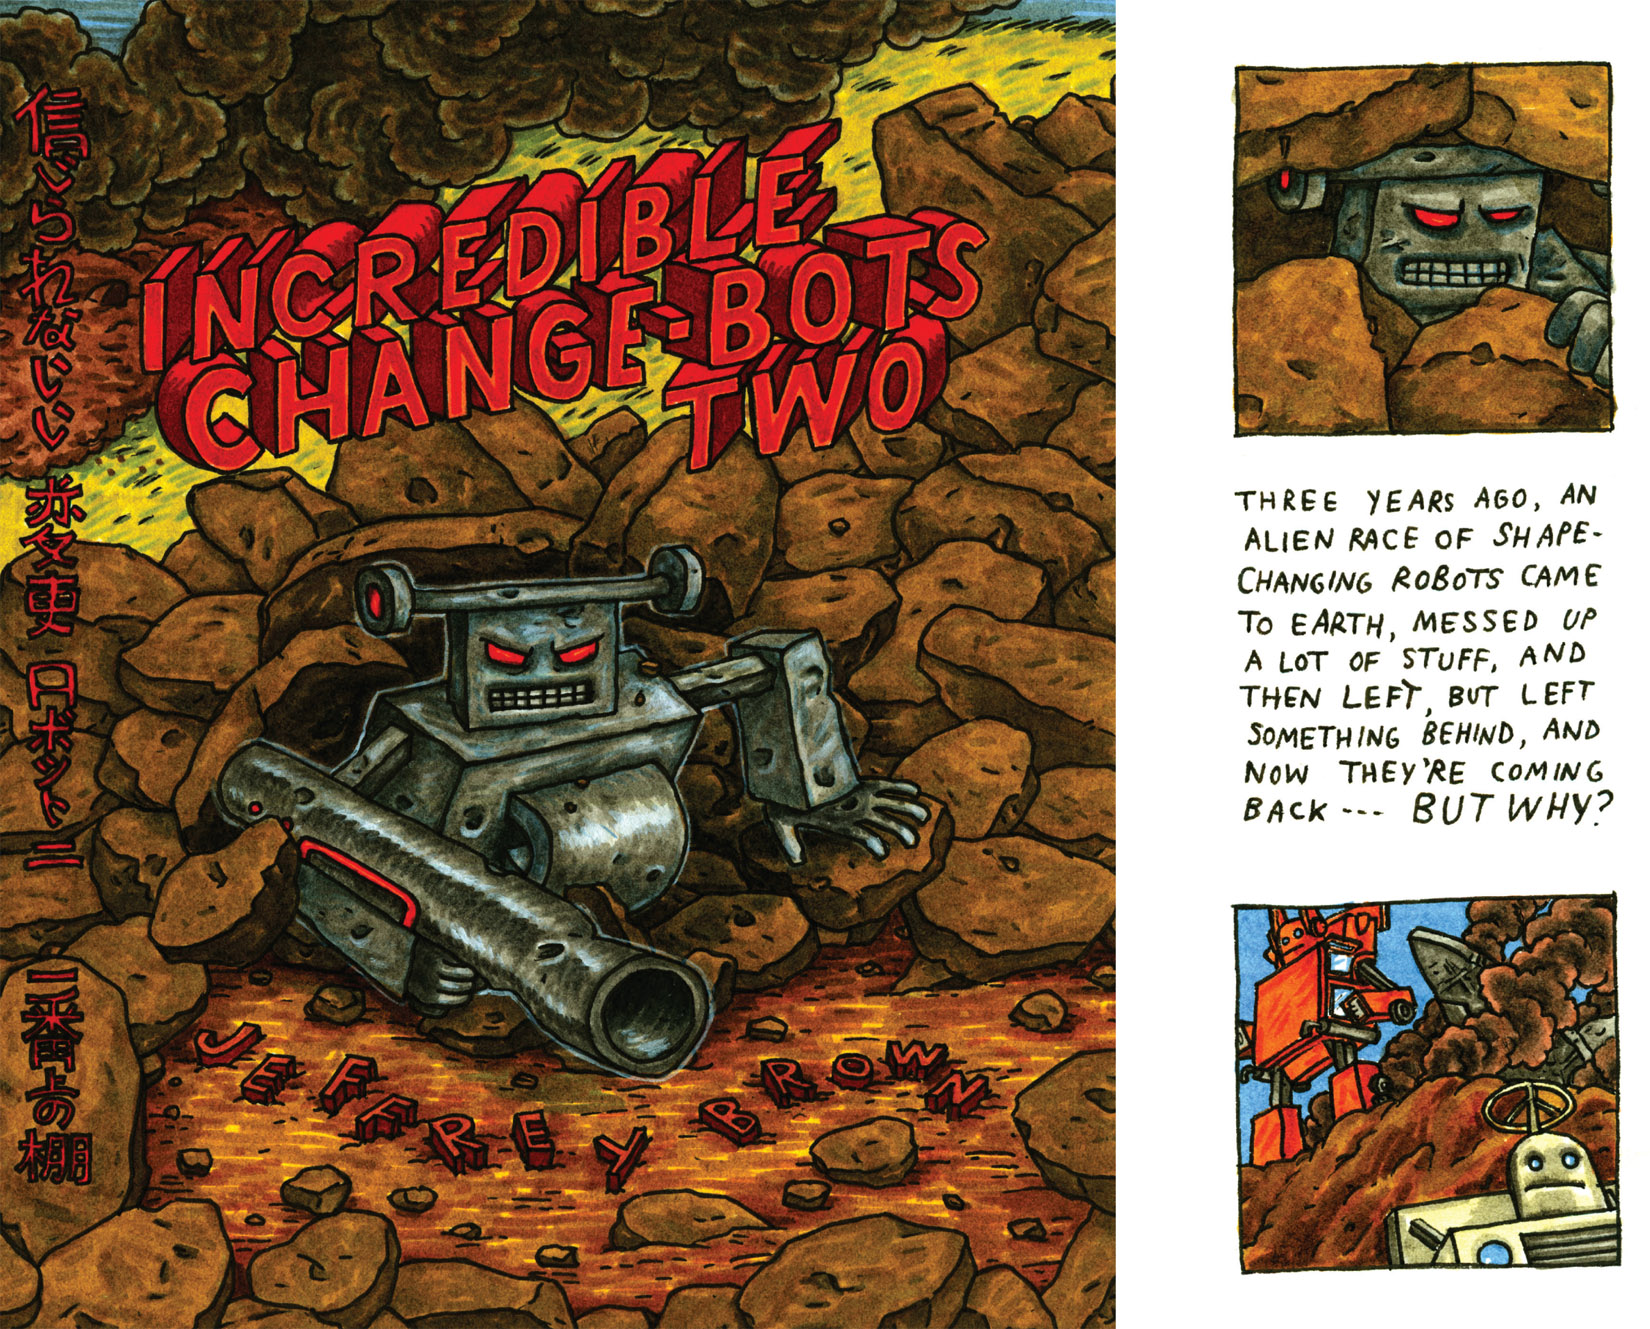 Read online Incredible Change-Bots comic -  Issue # TPB 2 - 1